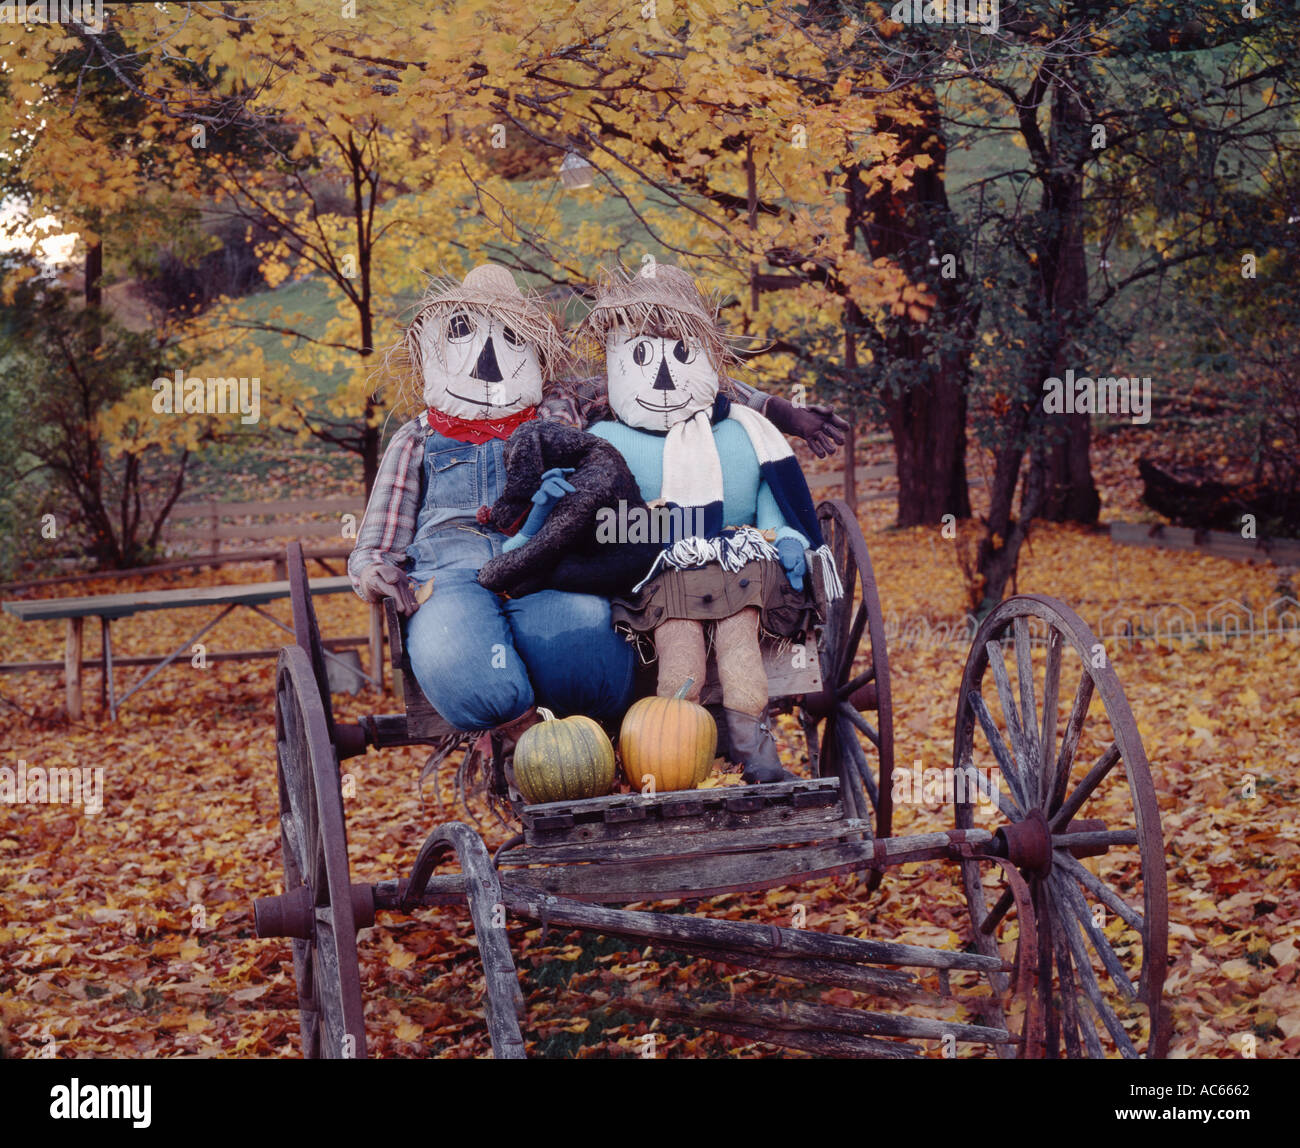 Autumn tradition in Vermont with a farm wagon carrying two humorously dressed scarecrows celebrating the harvest season Stock Photo